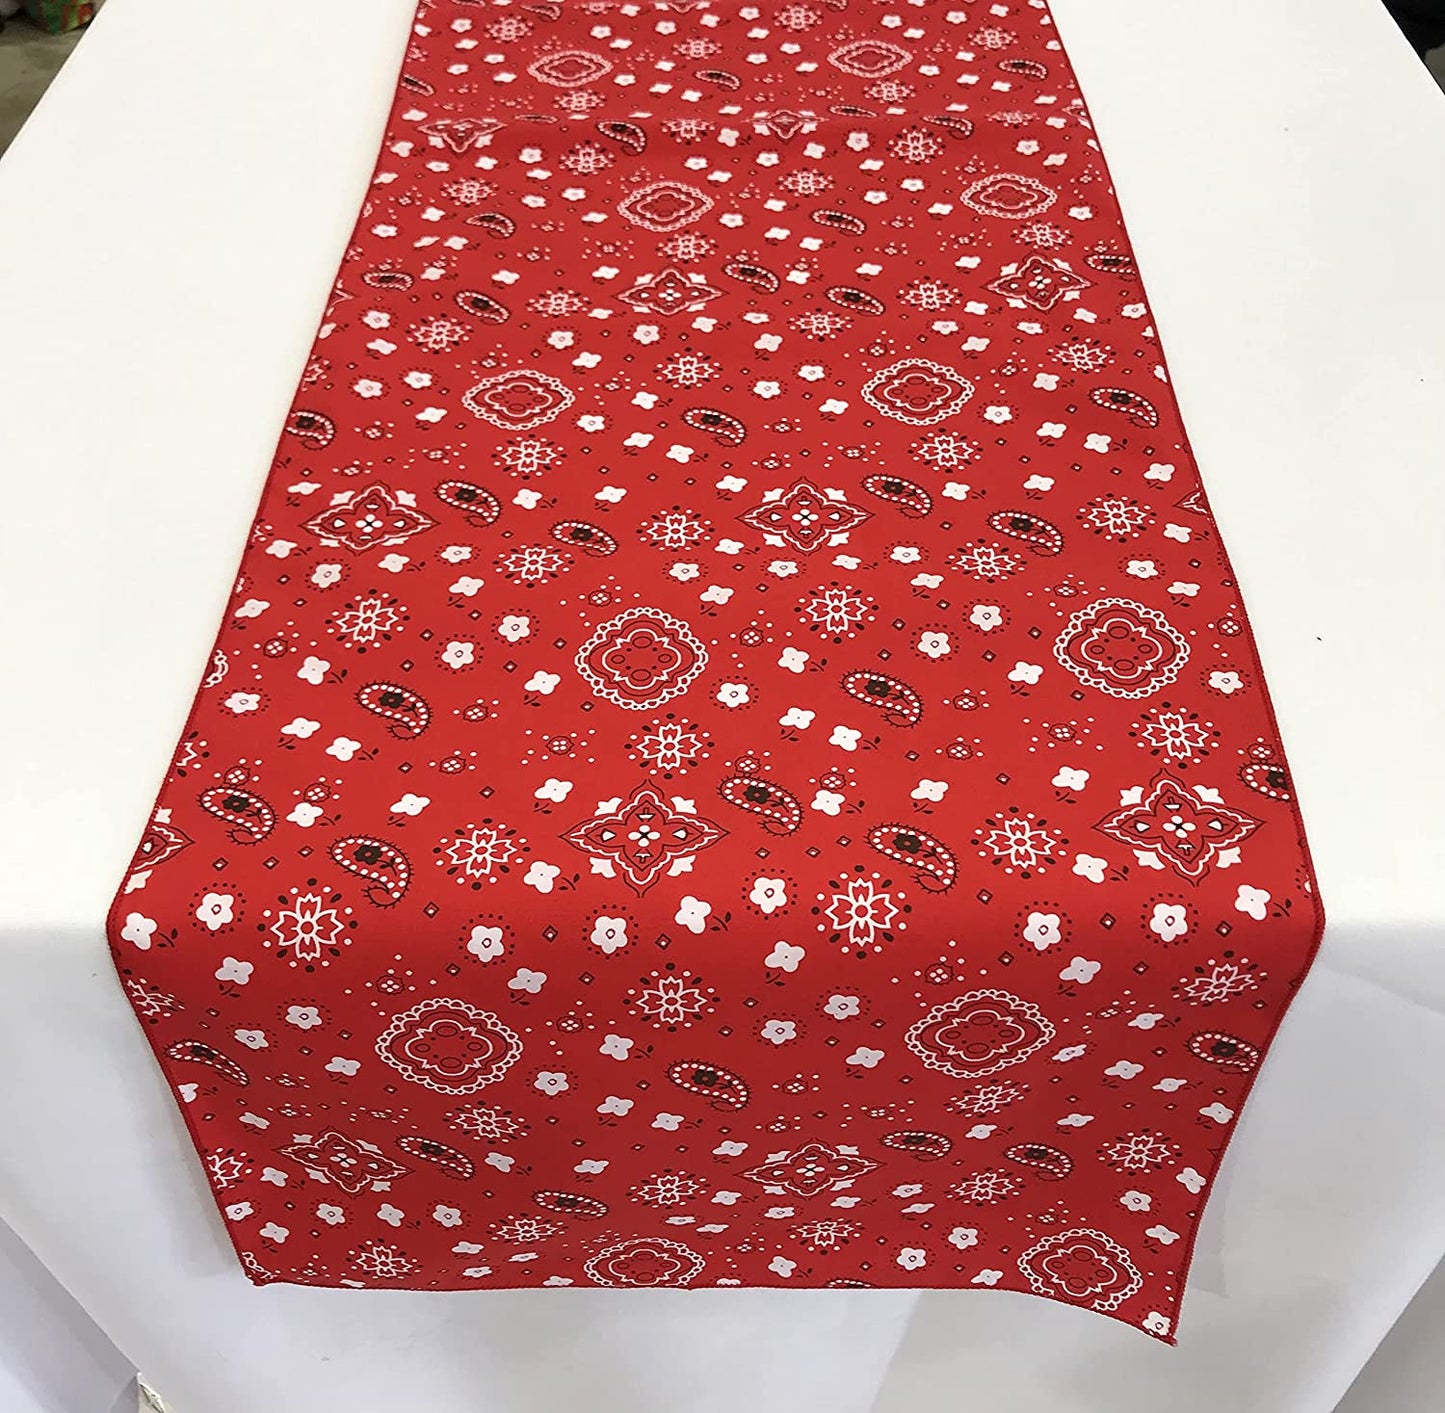 Bandanna Print Poly Cotton Table Runner (Red,